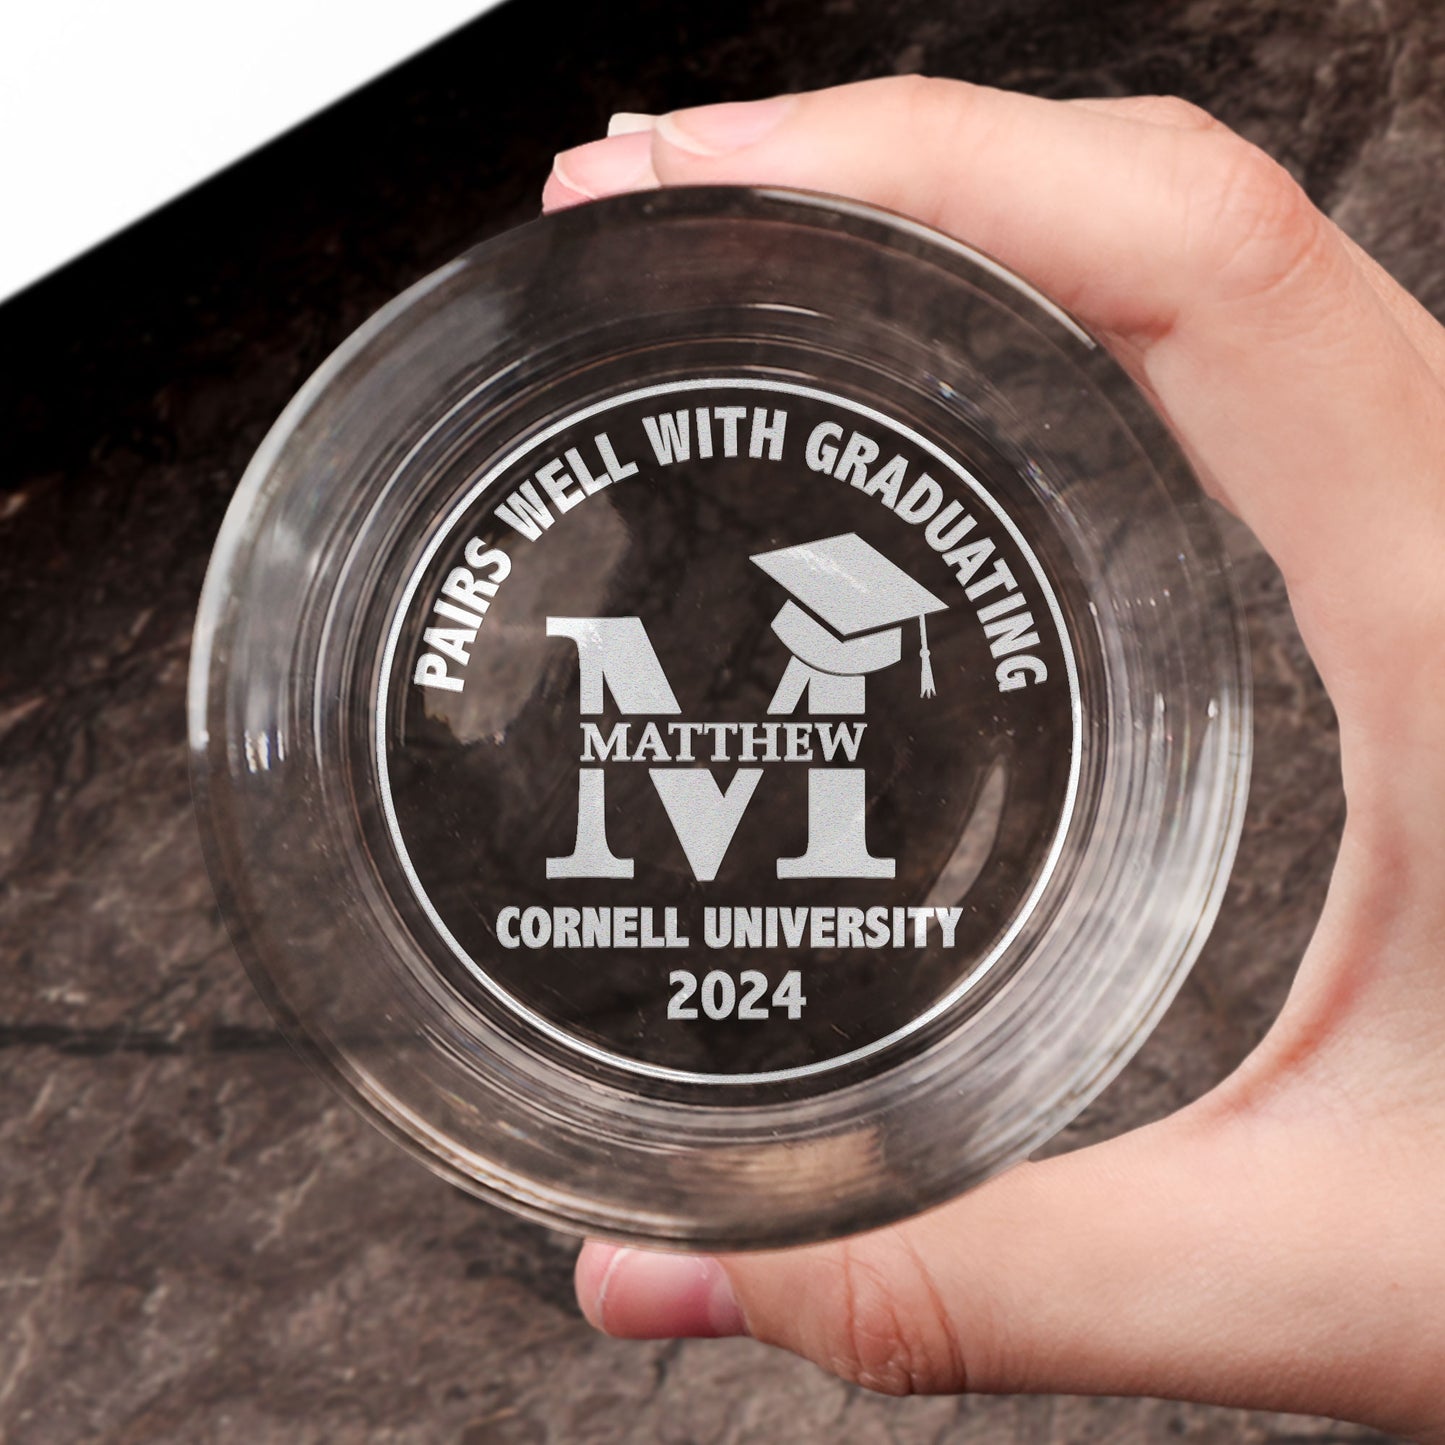 Graduation Gift Pairs Well With Graduating - Personalized Engraved Whiskey Glass